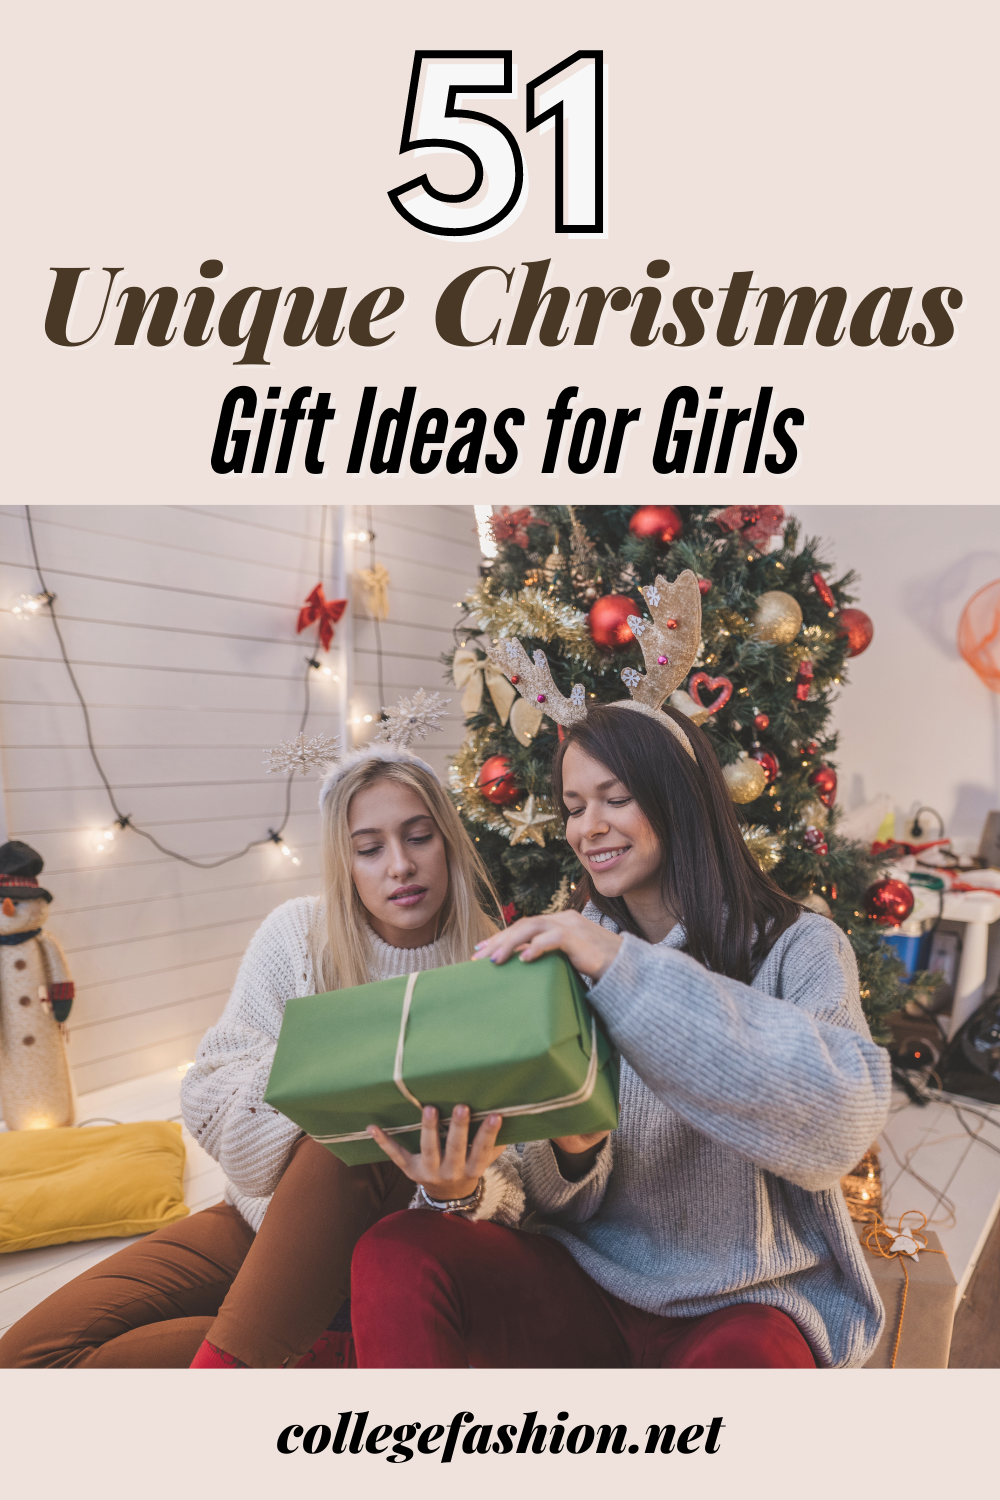 51 popular and unique Christmas gift ideas for girls - photo of two women opening a Christmas present